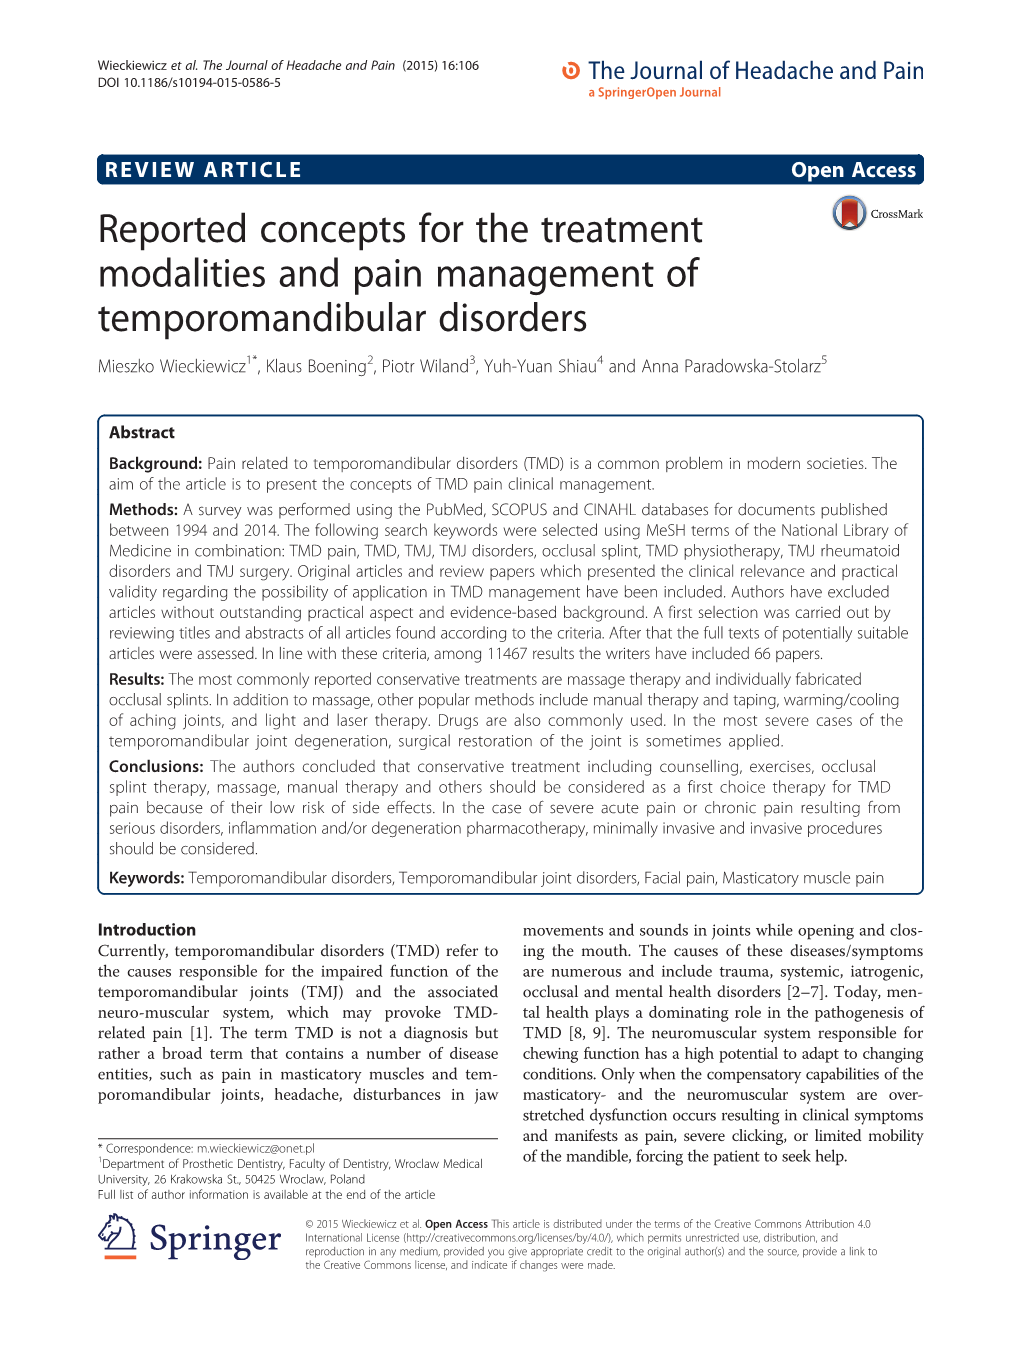 Reported Concepts for the Treatment Modalities and Pain Management Of